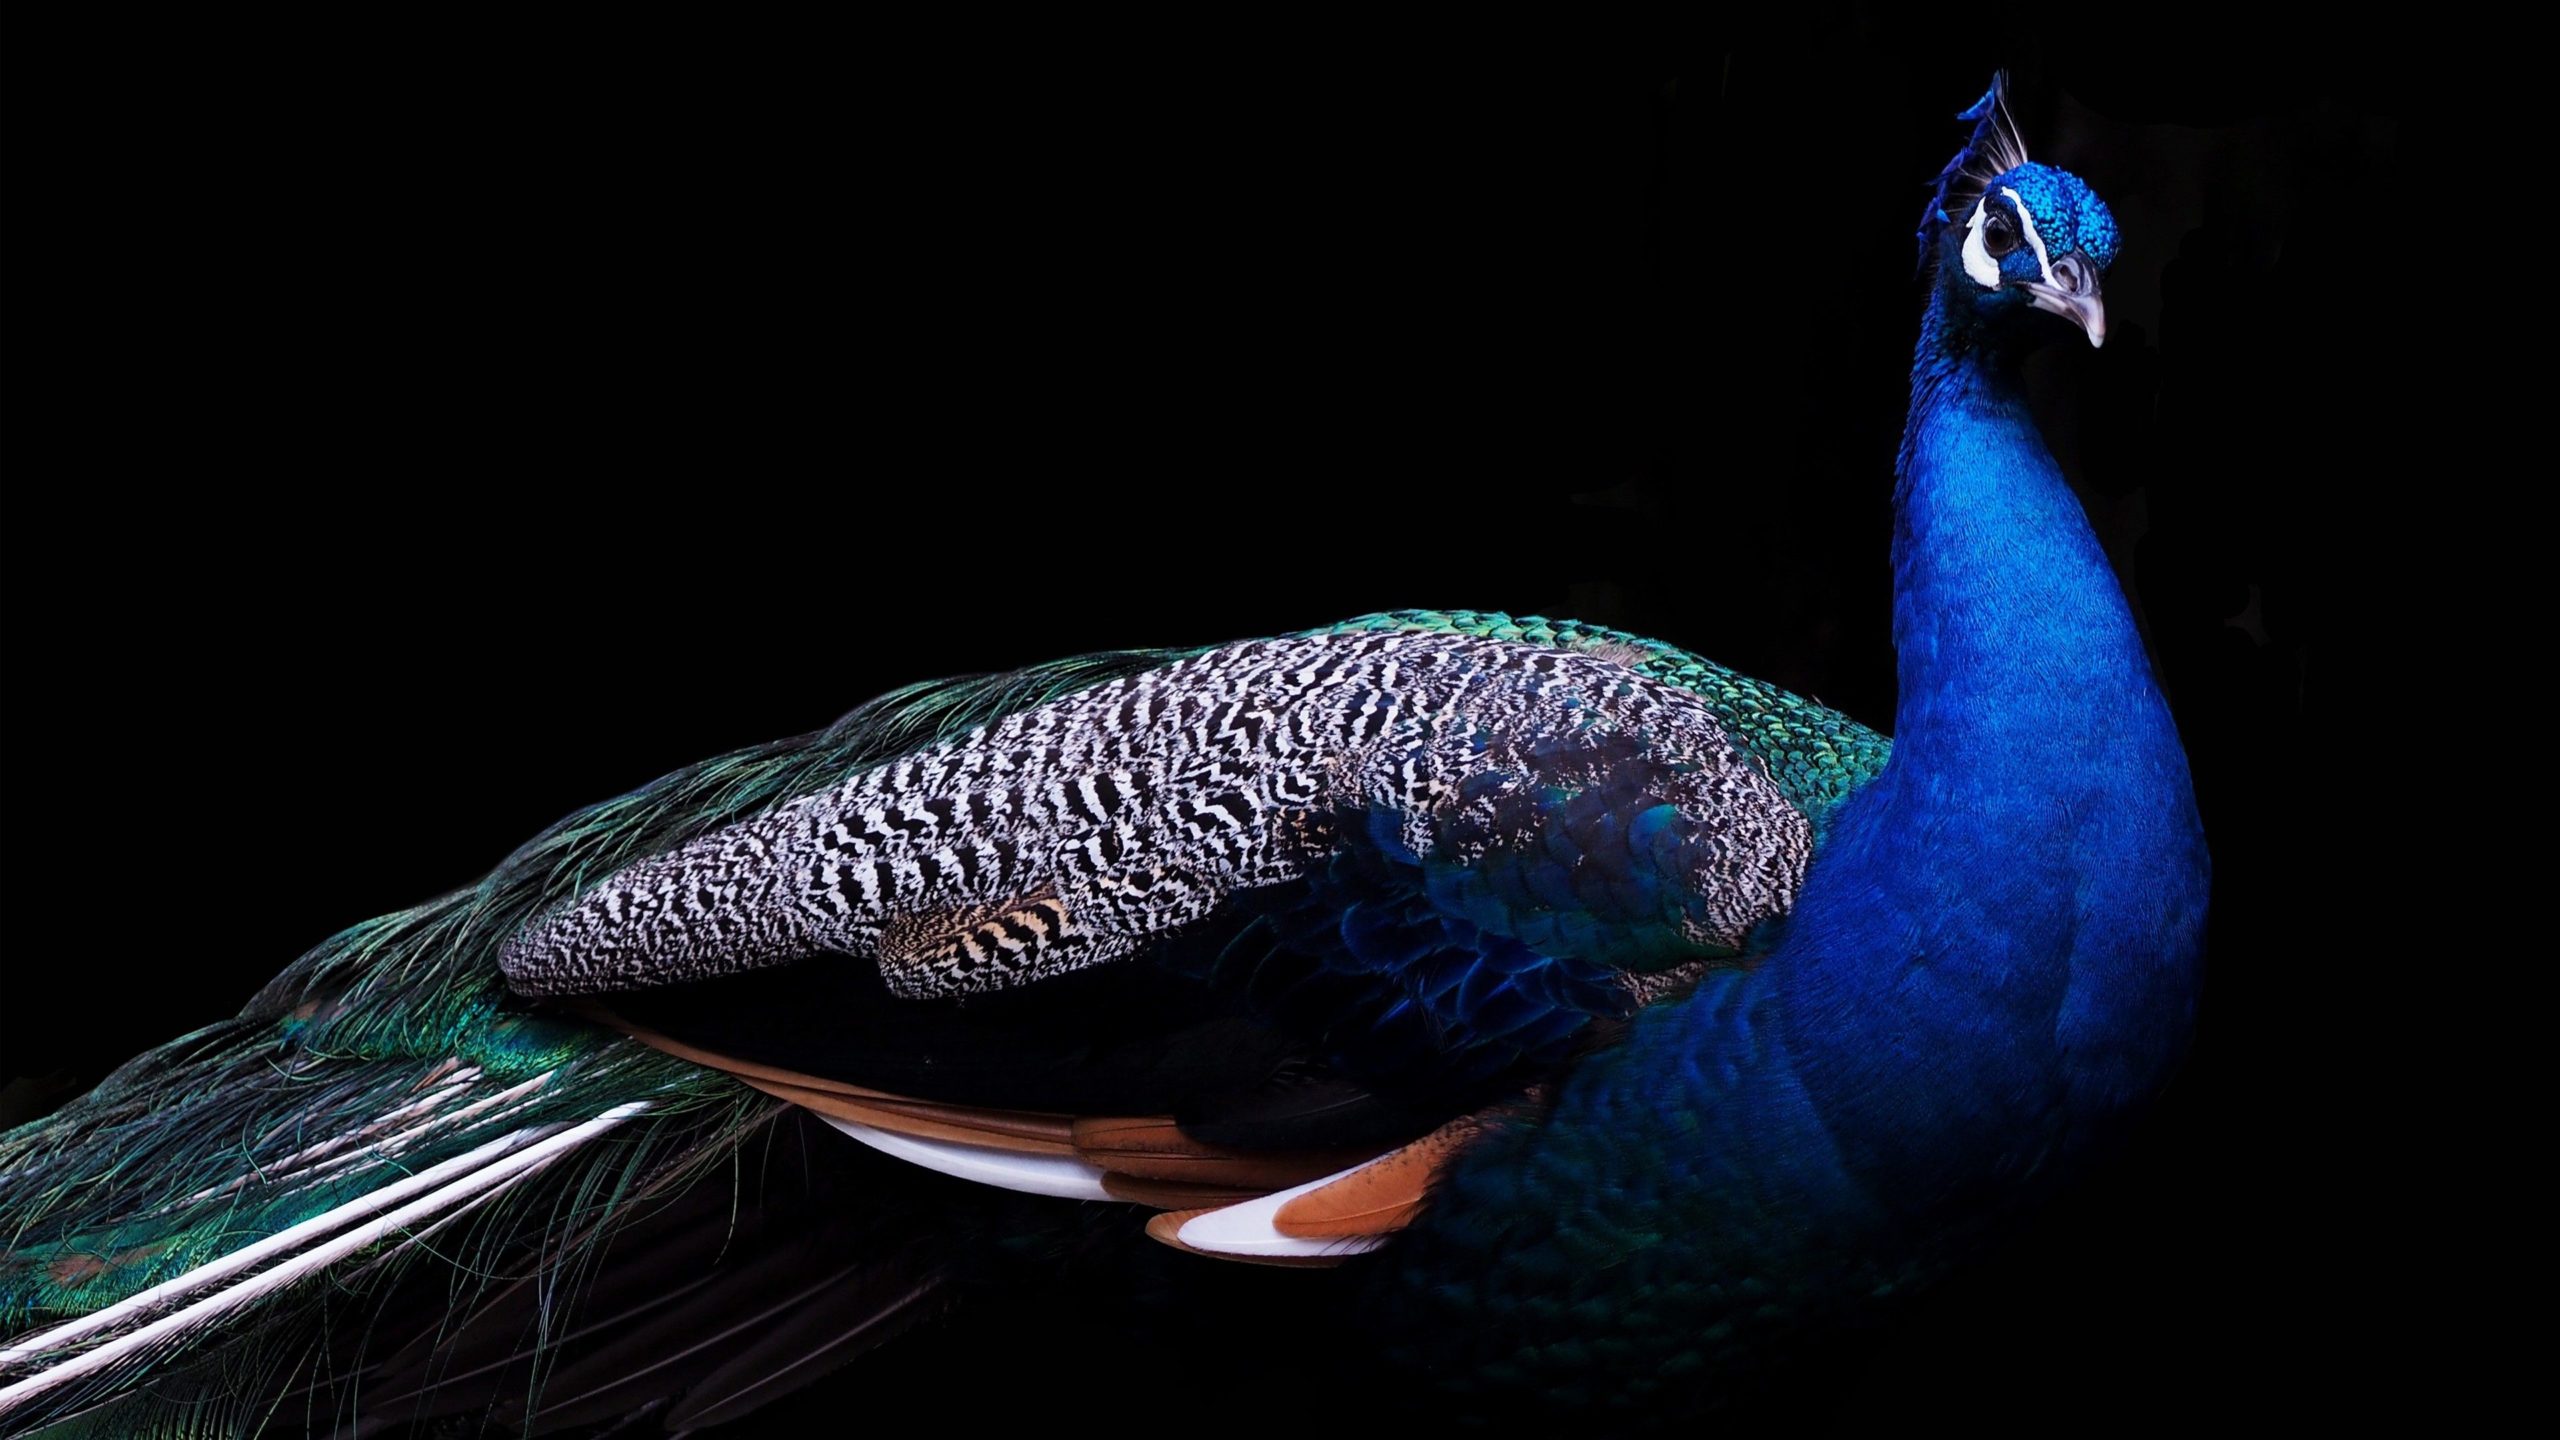 peacock image free download